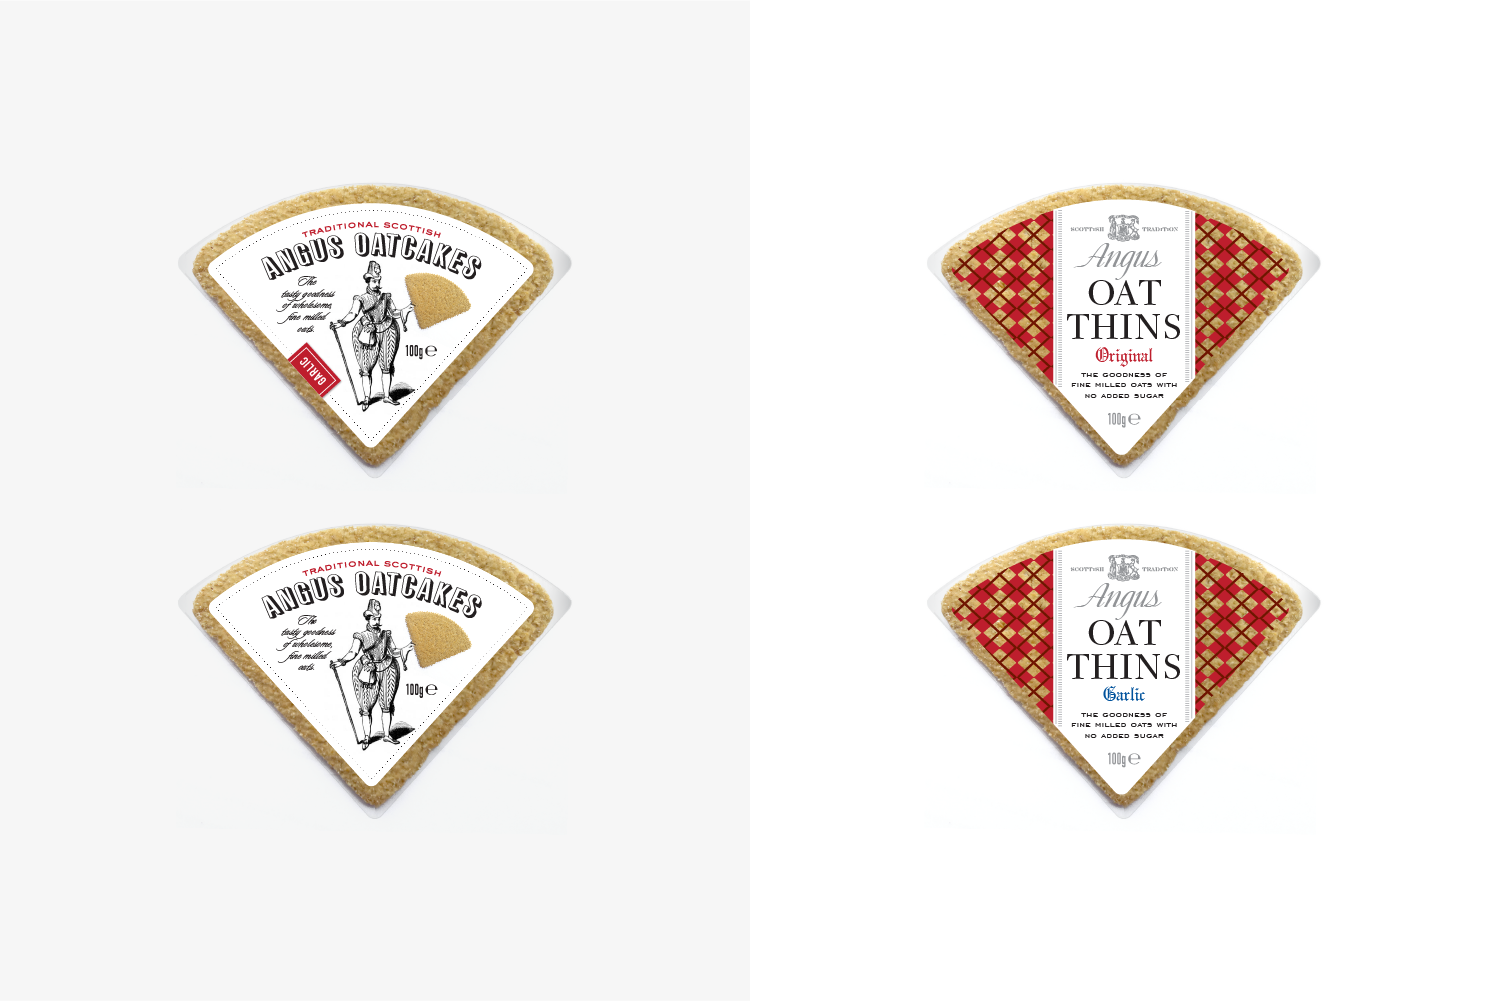 Alternate Angus Oat thins packaging design concepts infusing humor and scottish plaid pattern. 